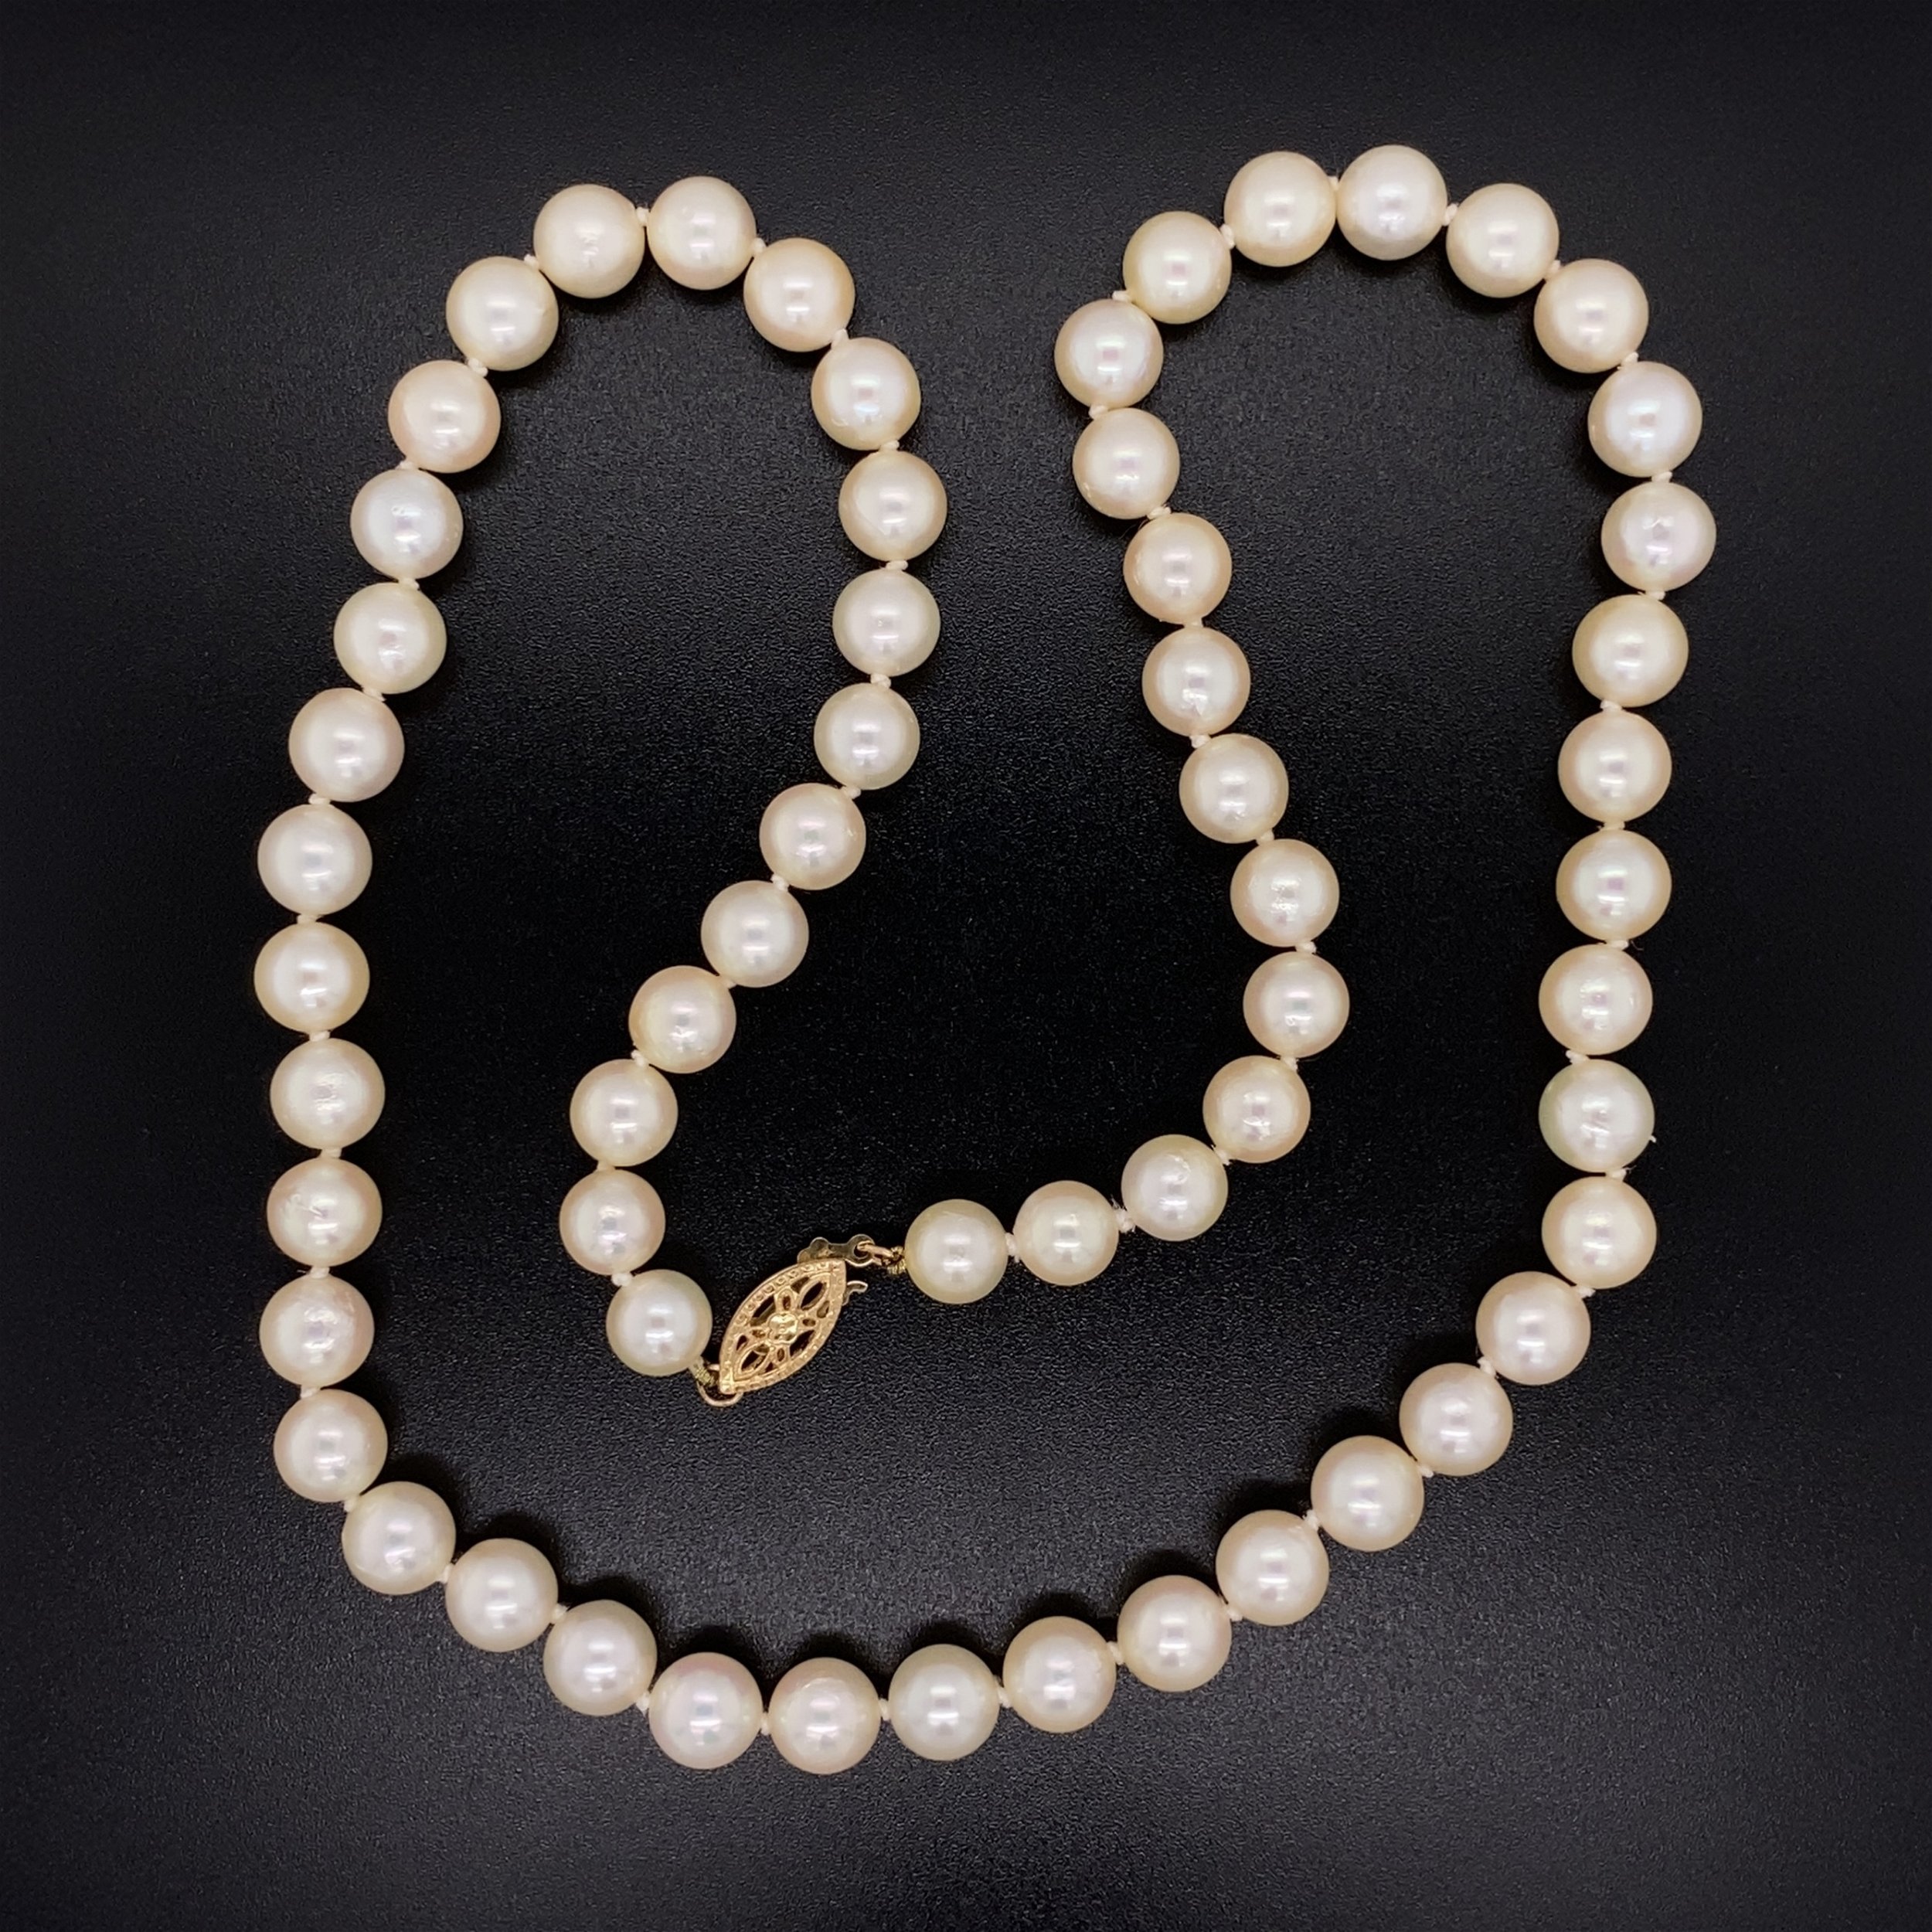 NECKLACE of cultured pearls, white gold clasp 750 mm. … | Drouot.com